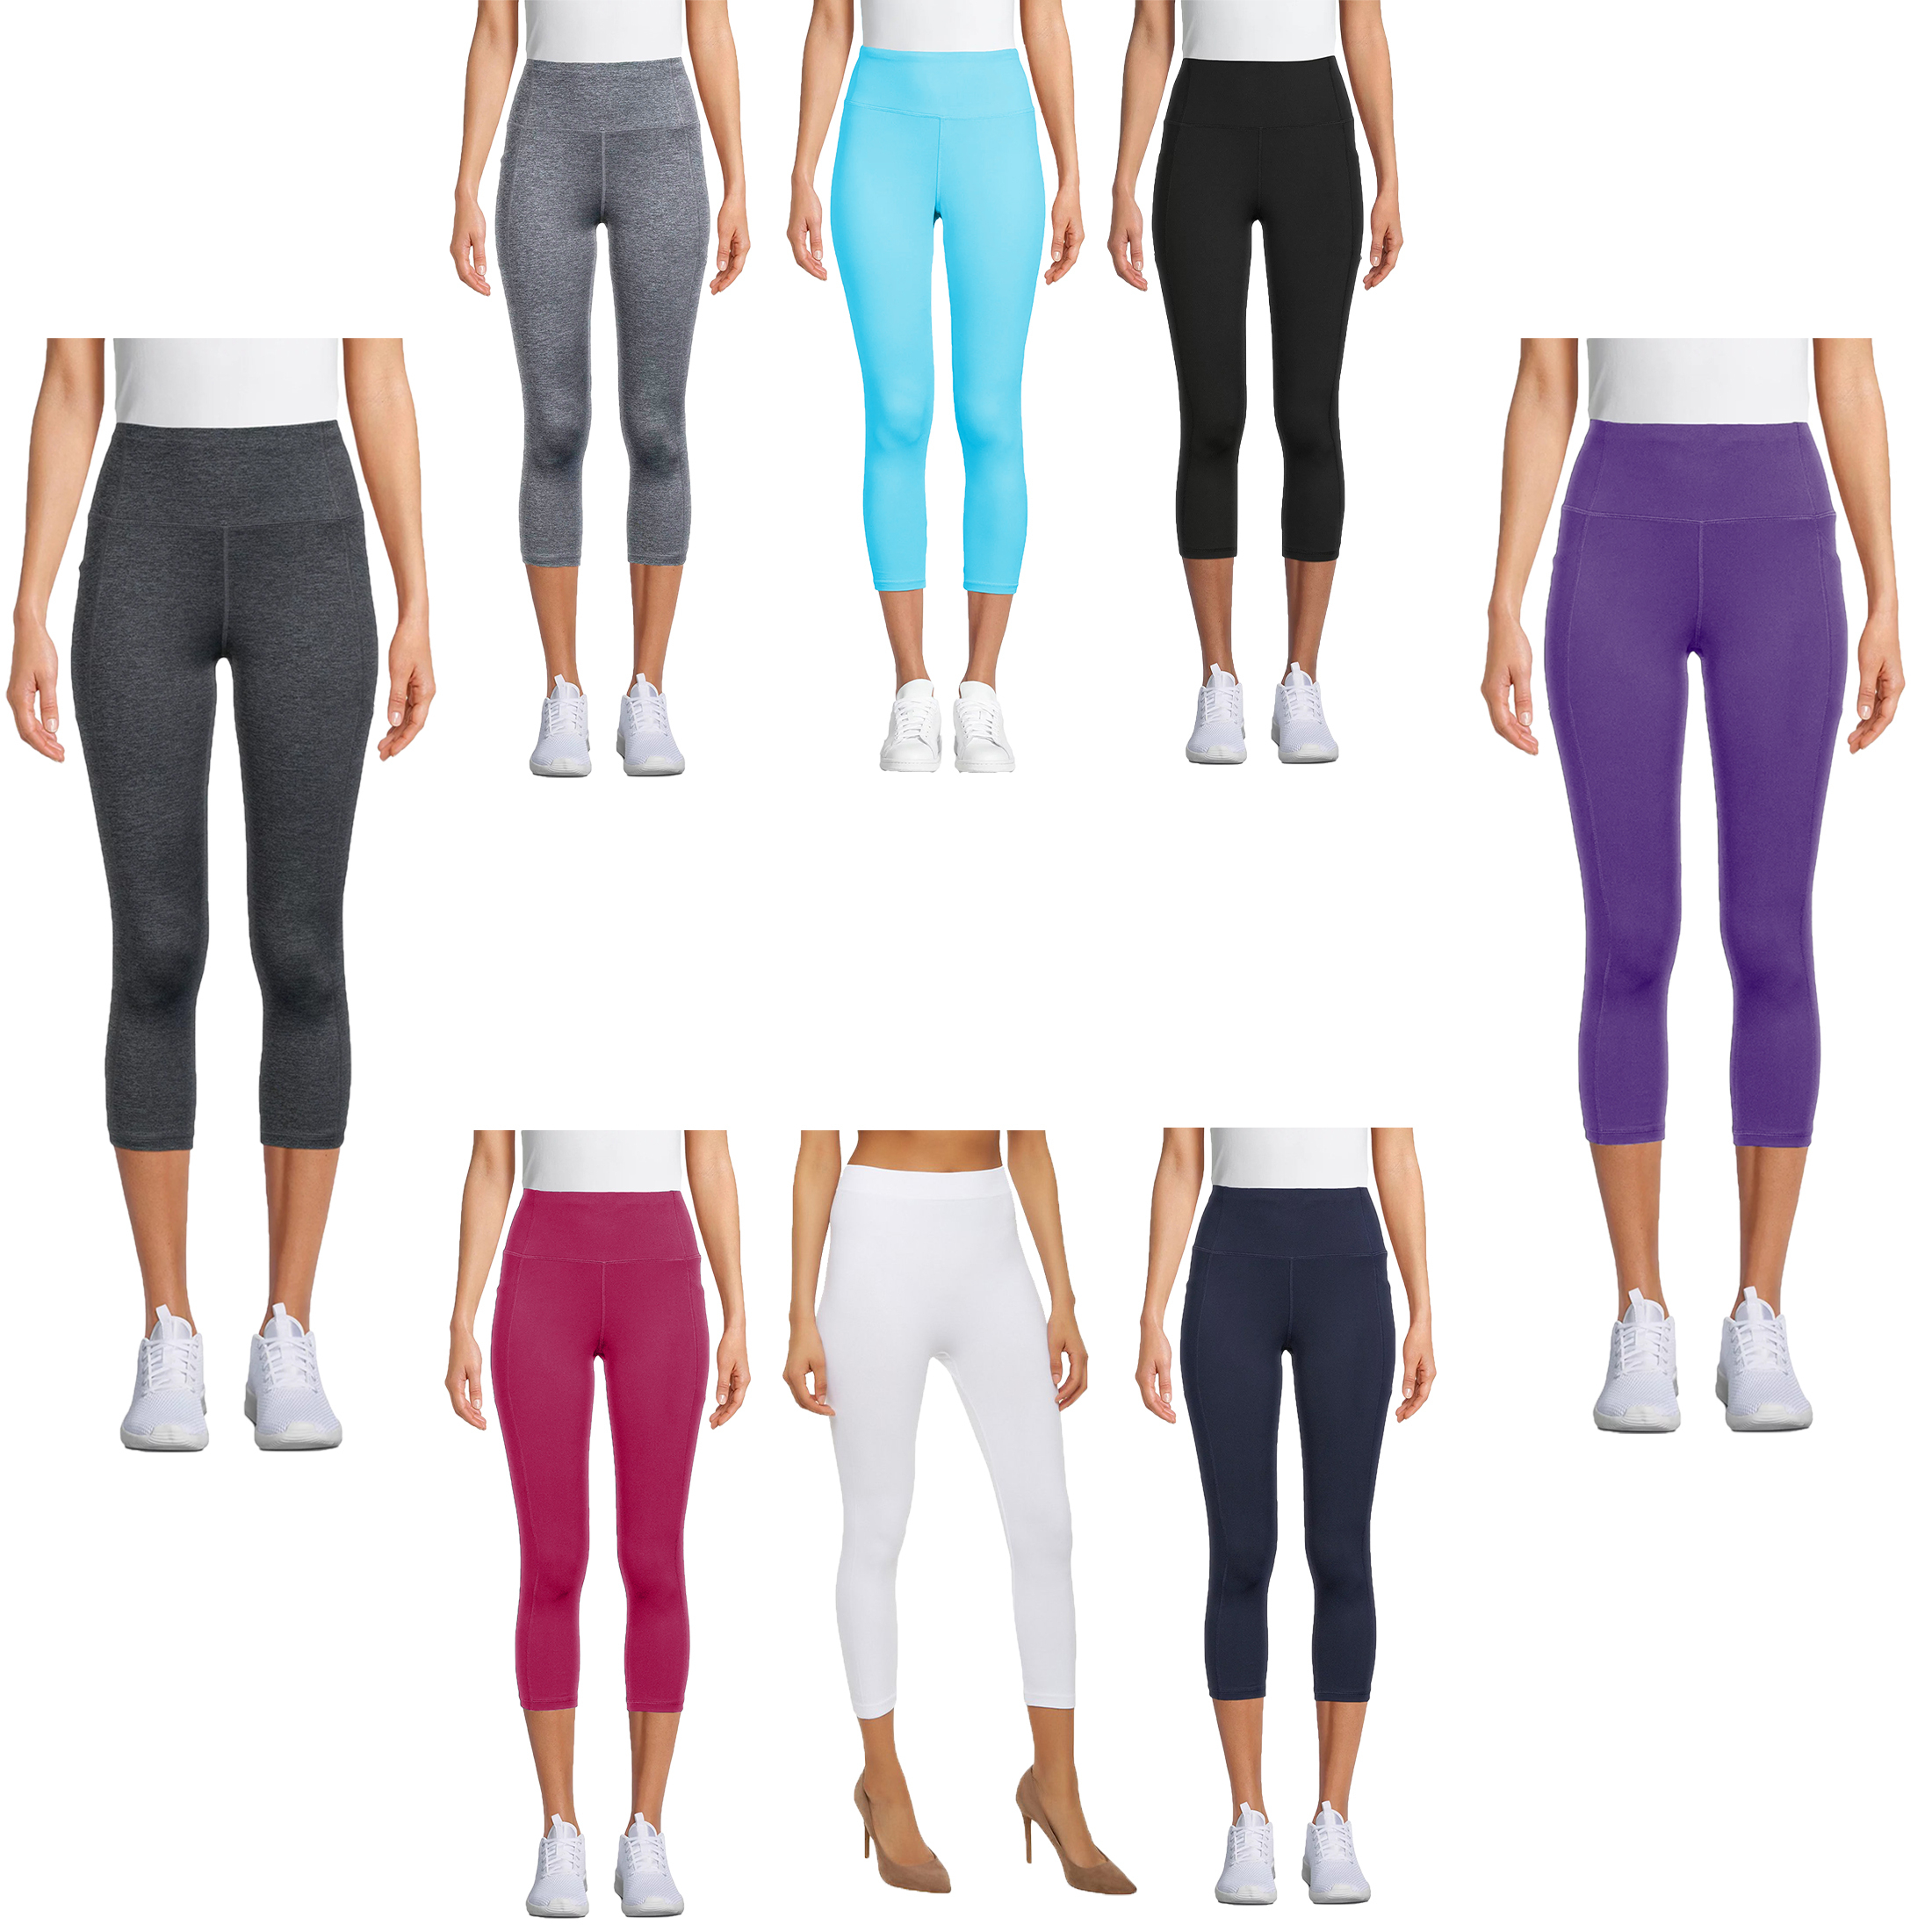 6-Pack: Ladies High Waisted Solid Basic Ultra Soft Active Workout Capri Leggings - M